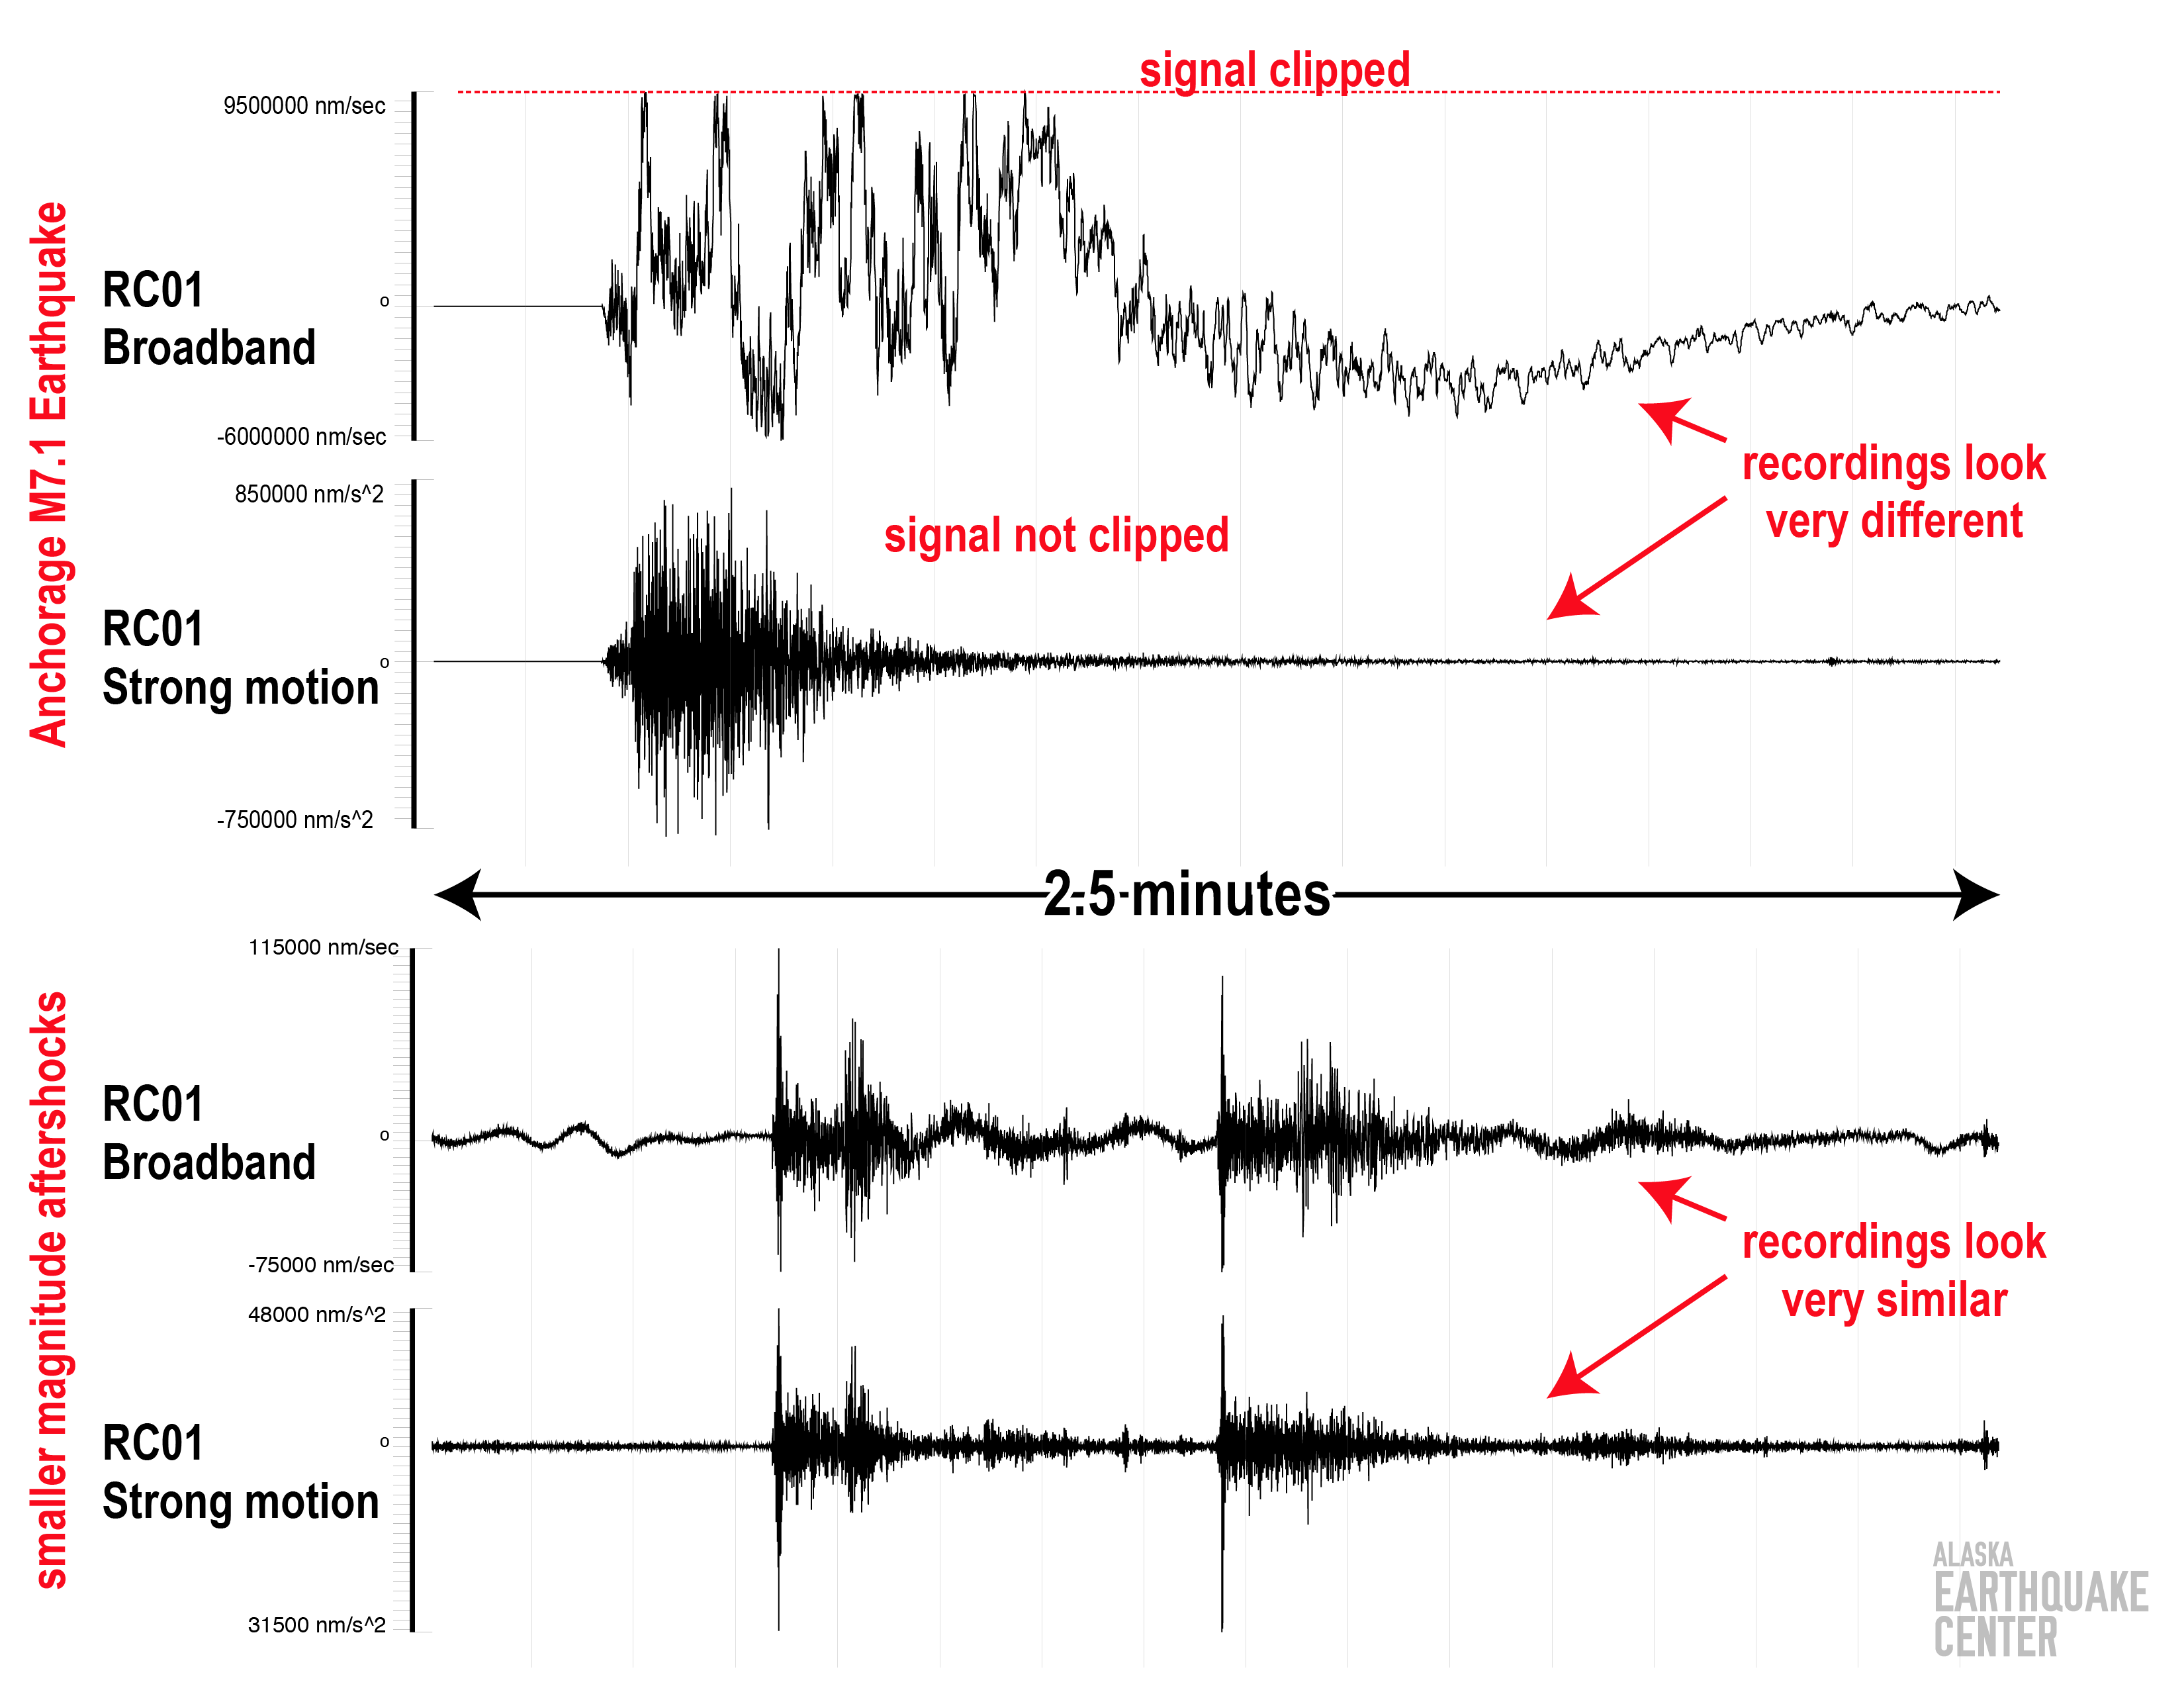 For large earthquake, seismogram from strong motion sensor shows full earthquake waveform compared to seismogram from broadband seismometer showing jagged, spread out waveform.  For small earthquake, seismograms from both instruments show full waveform. 